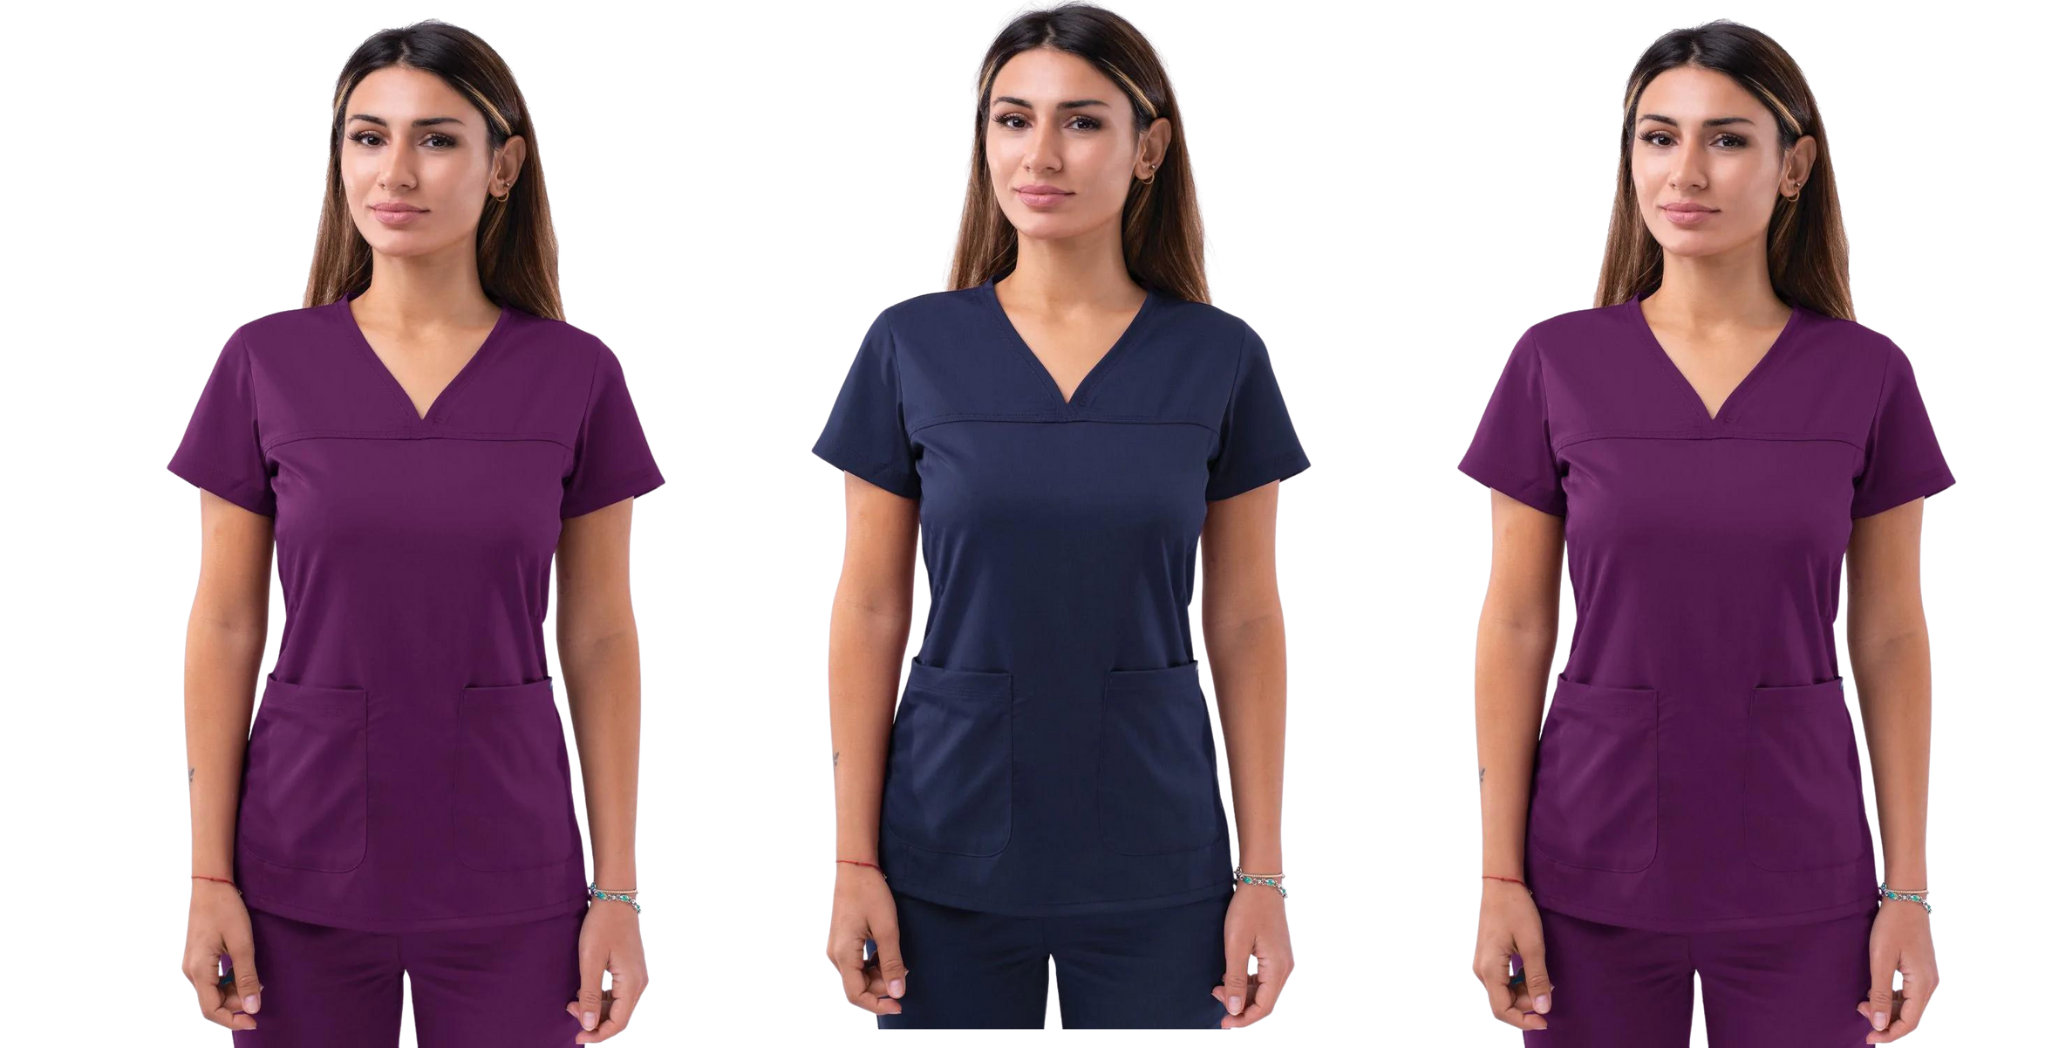 Things You Need To Know Before Buying Petite Scrub Tops